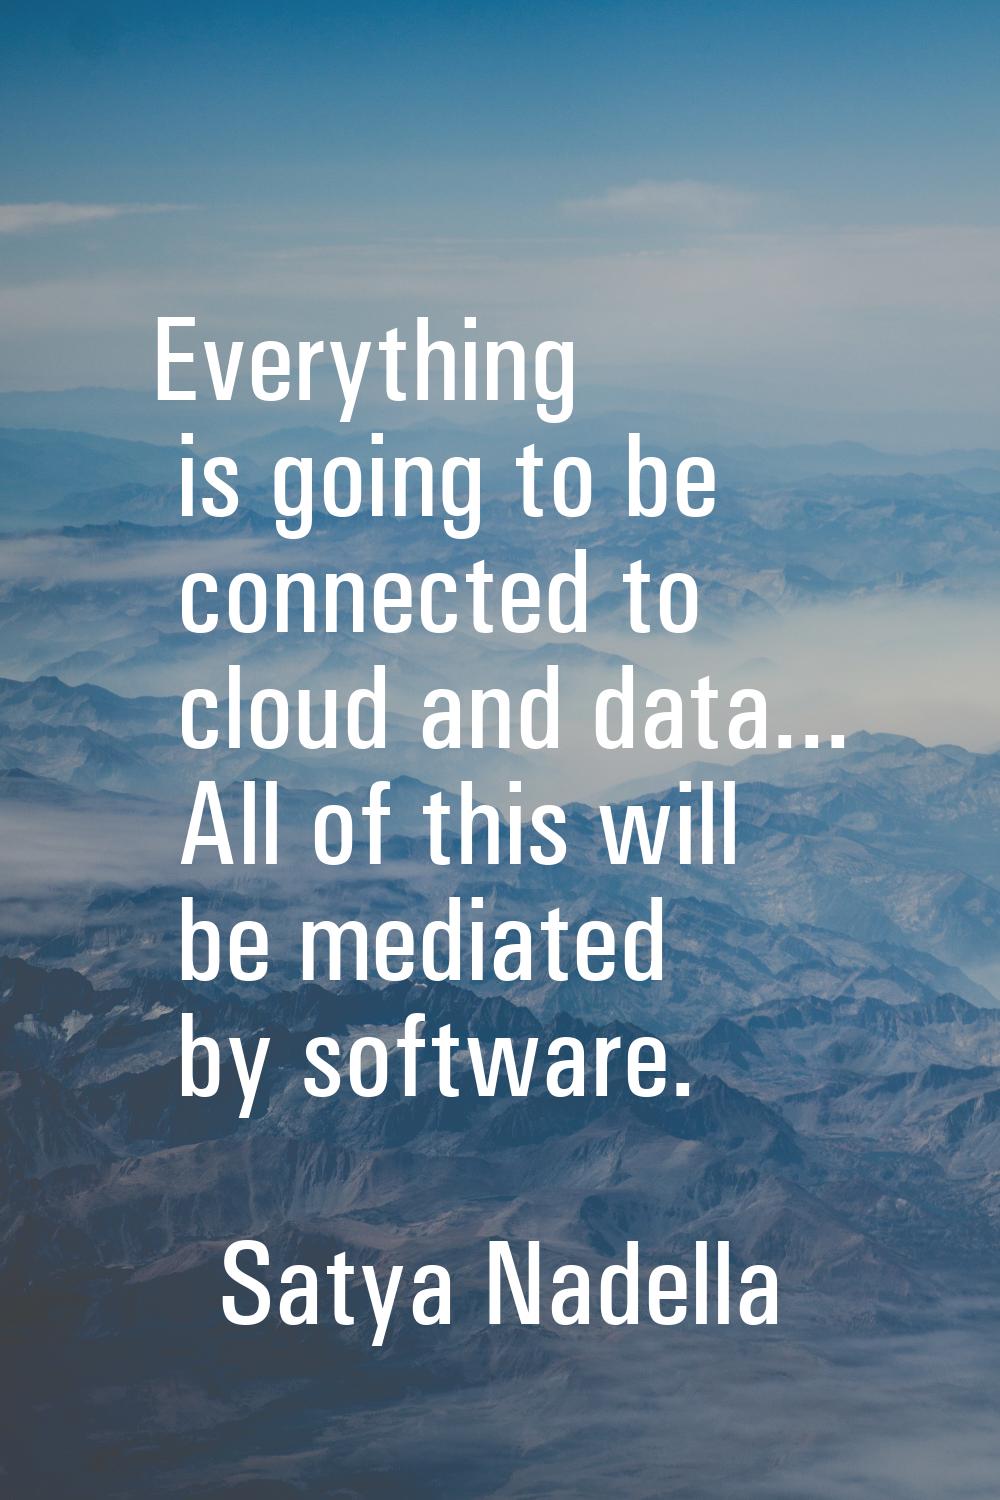 Everything is going to be connected to cloud and data... All of this will be mediated by software.